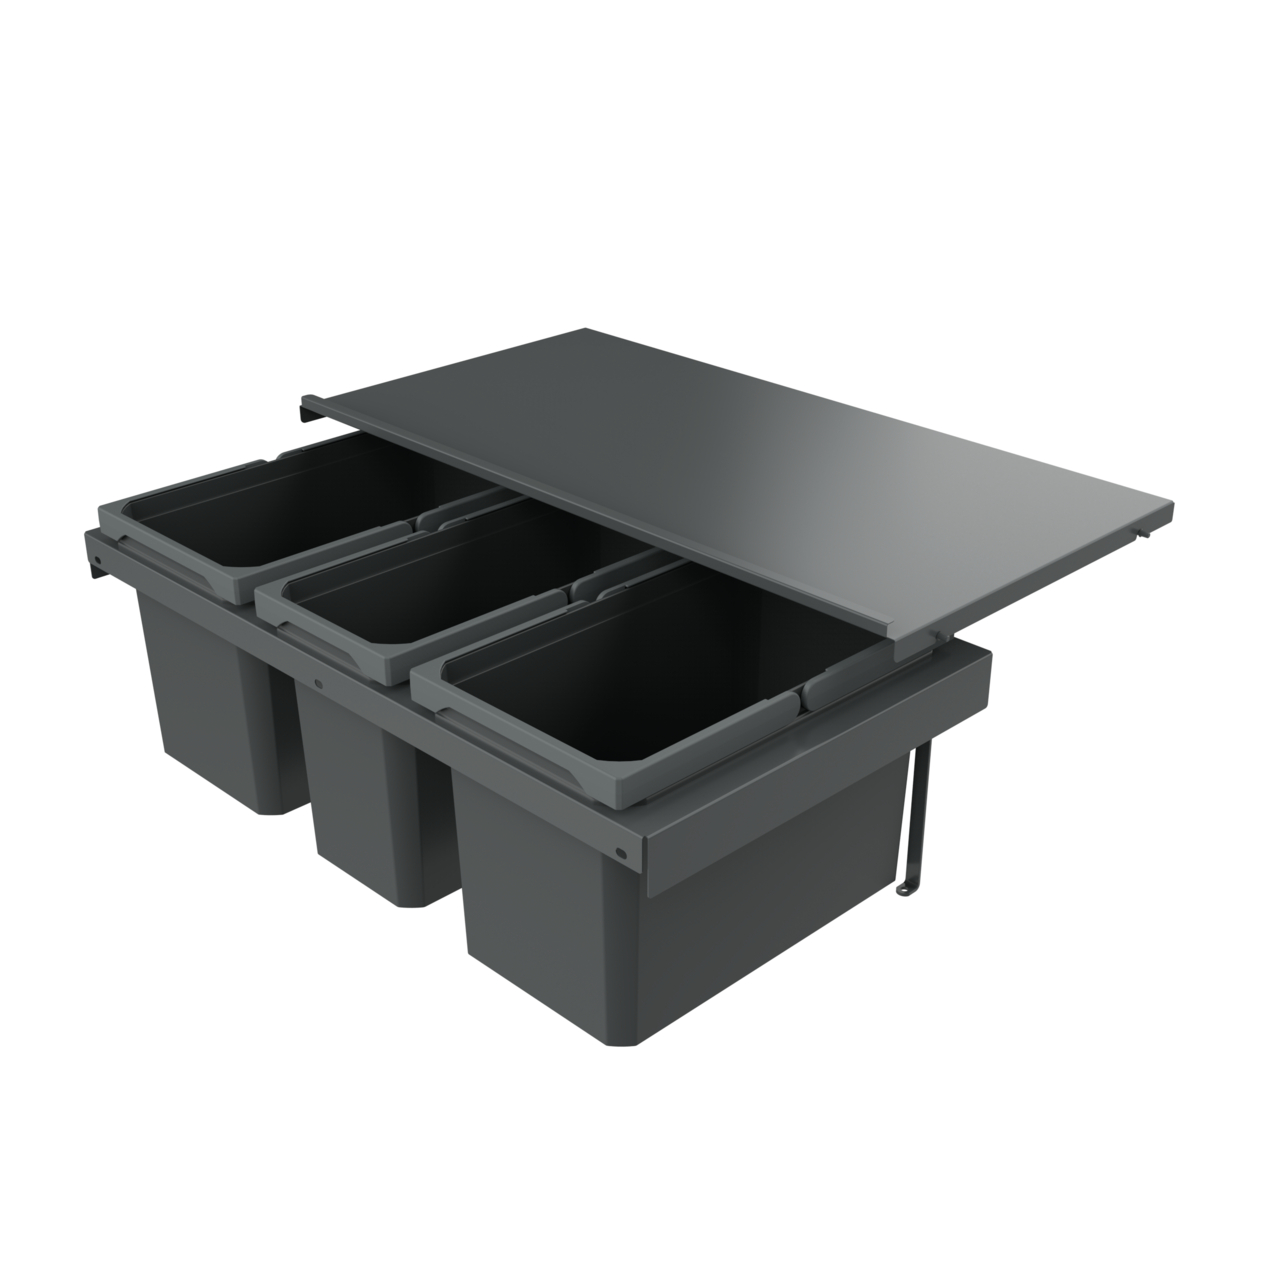  Cox Stand-UP® 280 S/800-3, anthracite, H 275 mm